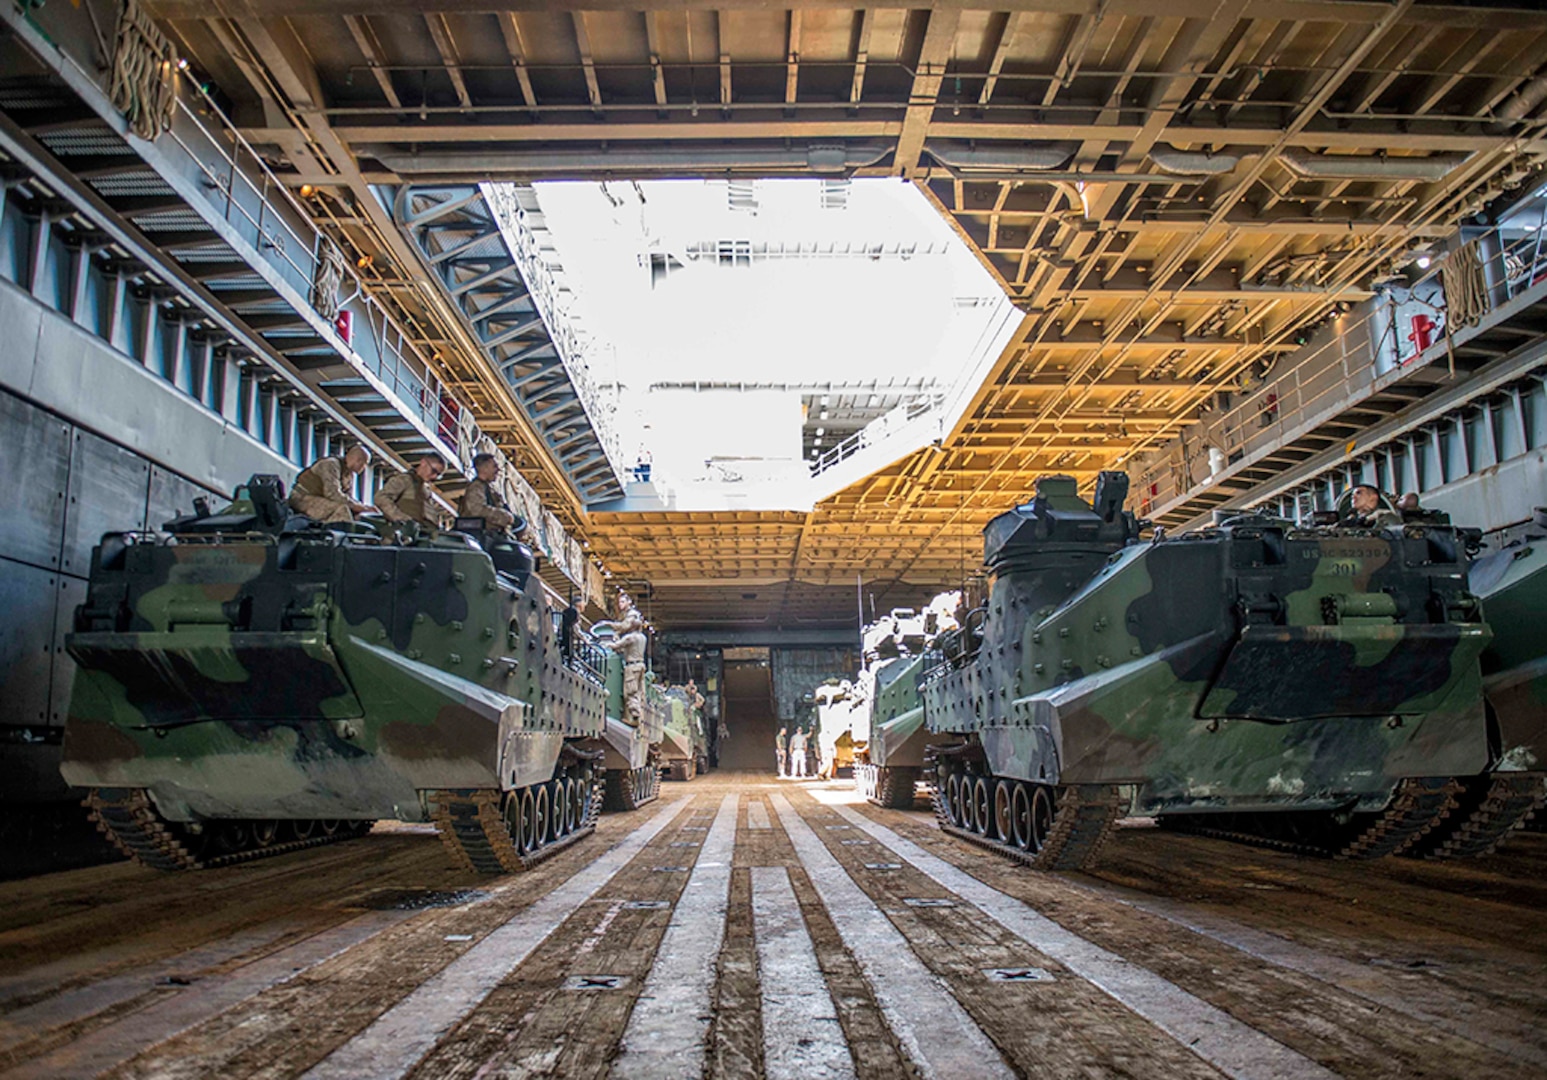 WATERS OFF OKINAWA, Japan – Amphibious assault vehicles wait in the well deck of the amphibious dock landing ship USS Germantown (LSD 42) before launching to head ashore for a personnel swap during exercise Blue Chromite (BC) 16. BC 16 is a U.S. only exercise designed to increase amphibious proficiency between the Navy and Marine Corps. 